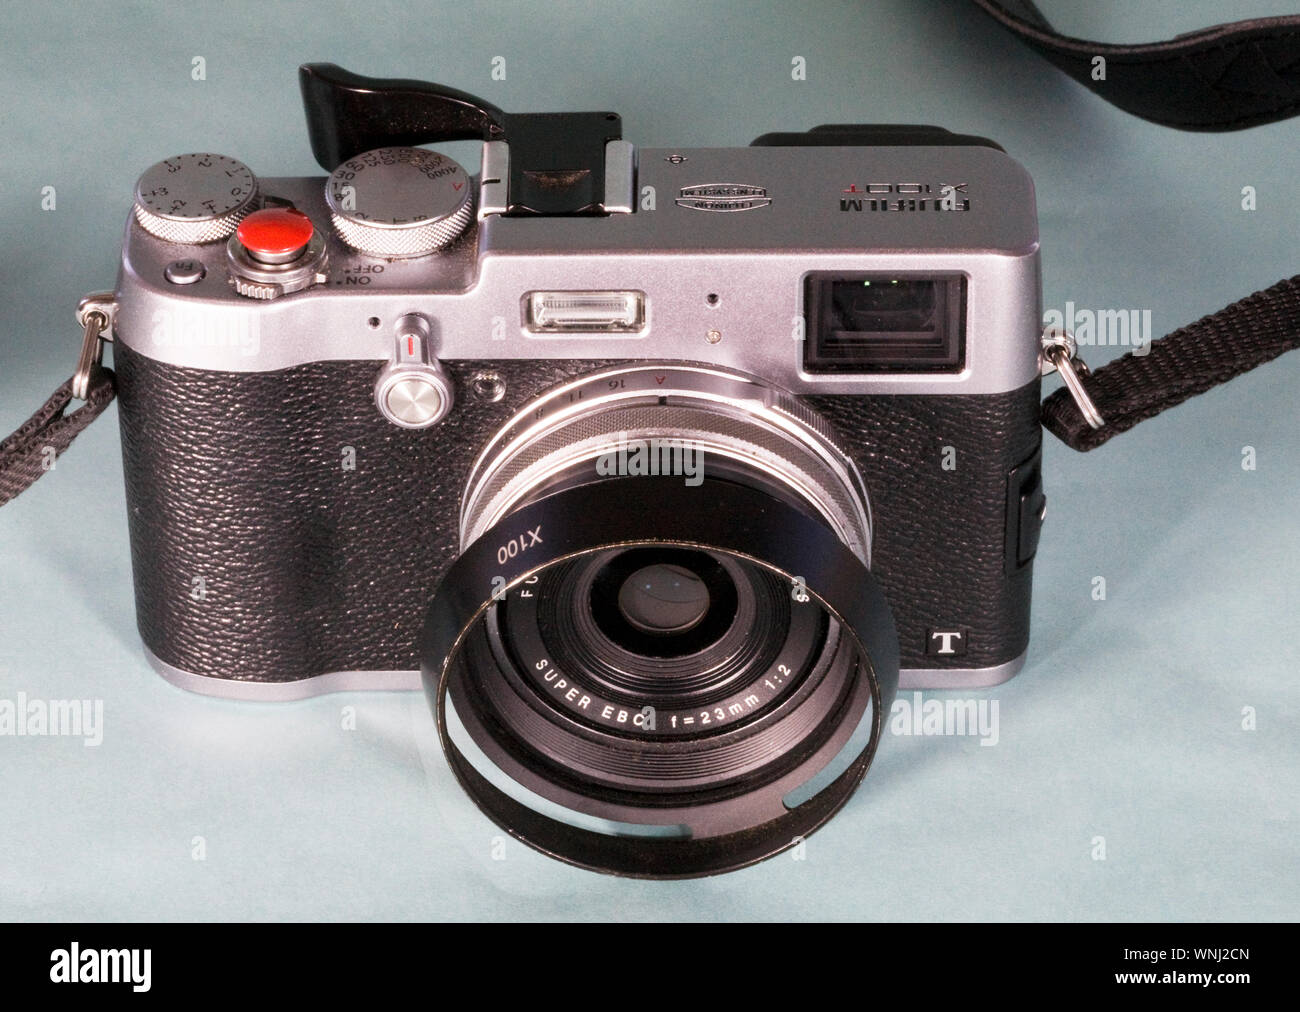 Detail of a Japanese made, DSLR camera, made by Fuji, with a fixed focus lens. Stock Photo